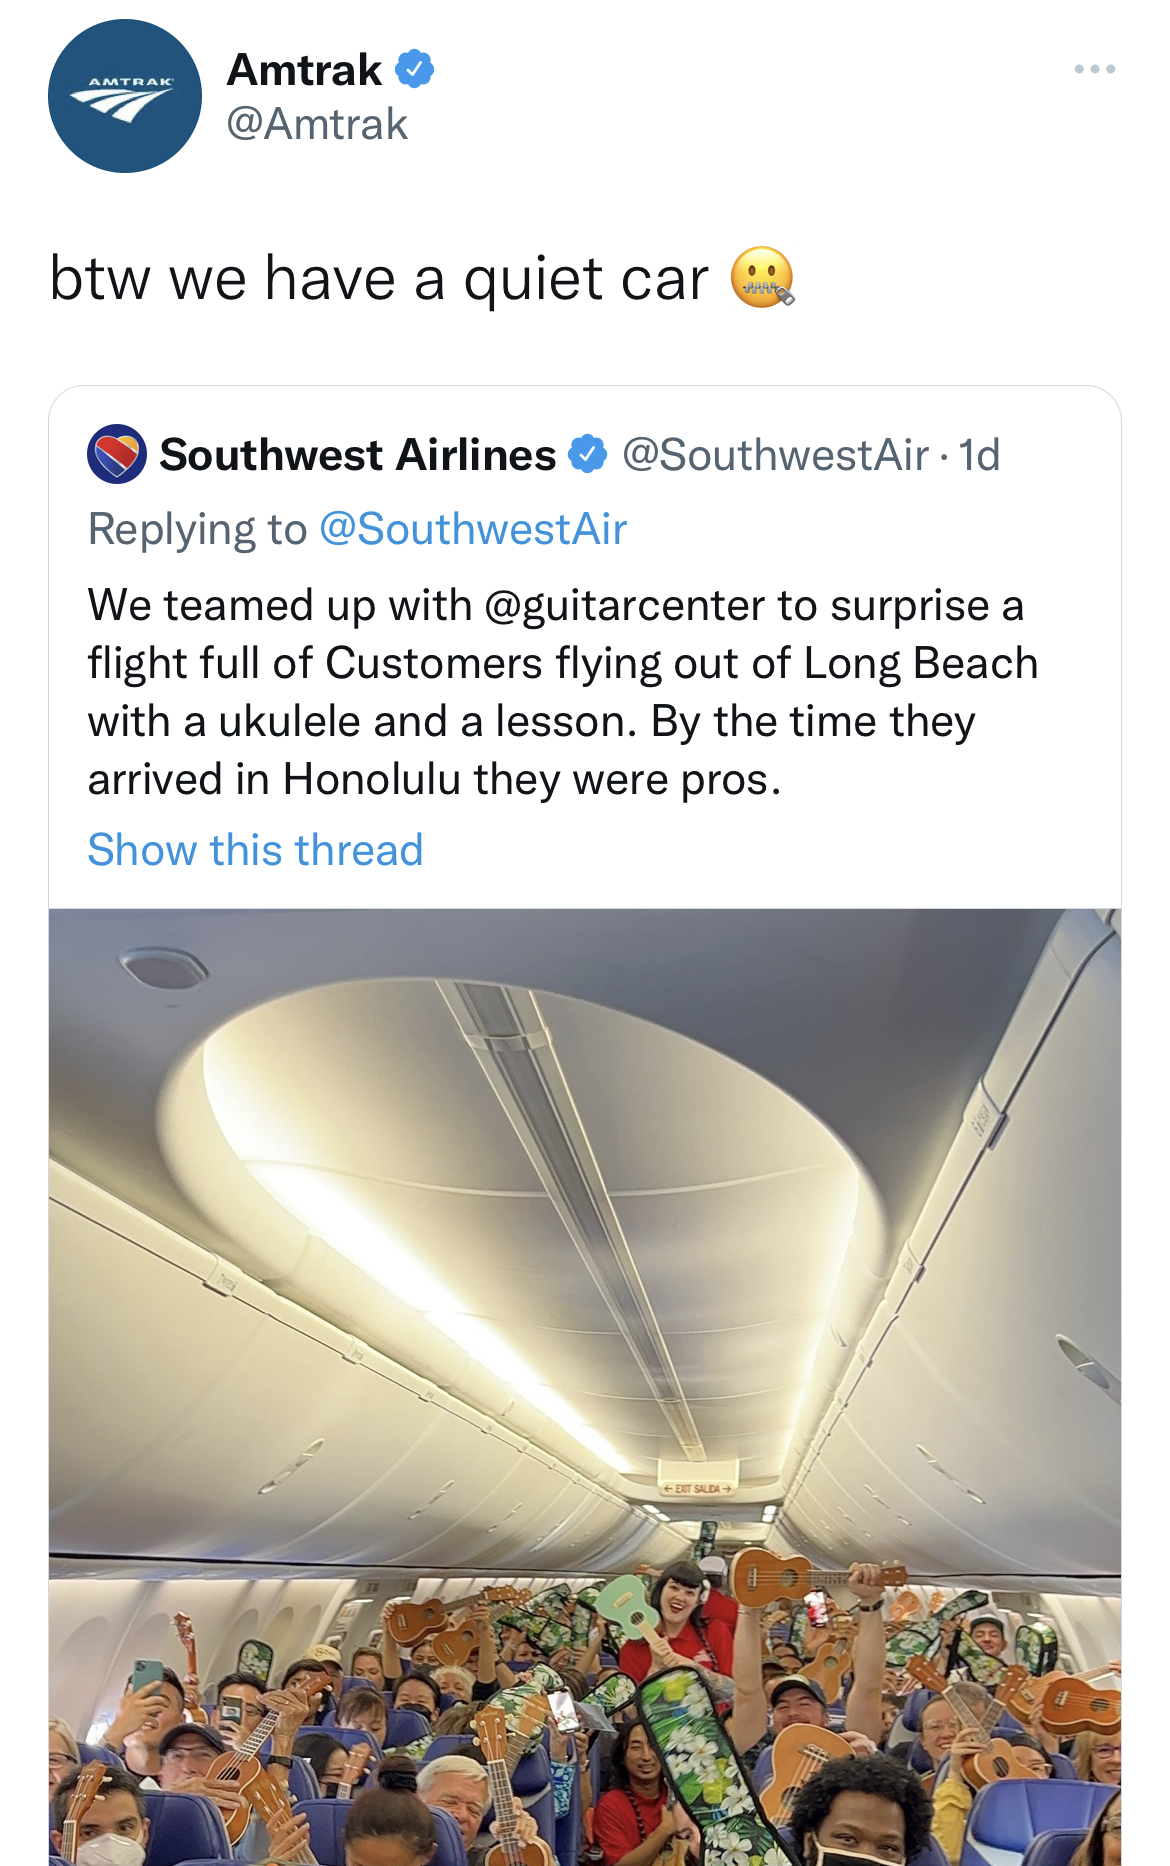 funny quick wit tweets - Amtrak btw we have a quiet car Southwest Airlines We teamed up with to surprise a flight full of Customers flying out of Long Beach with a ukulele and a lesson. By the time they arrived in Honolulu they were pros. Show this thread